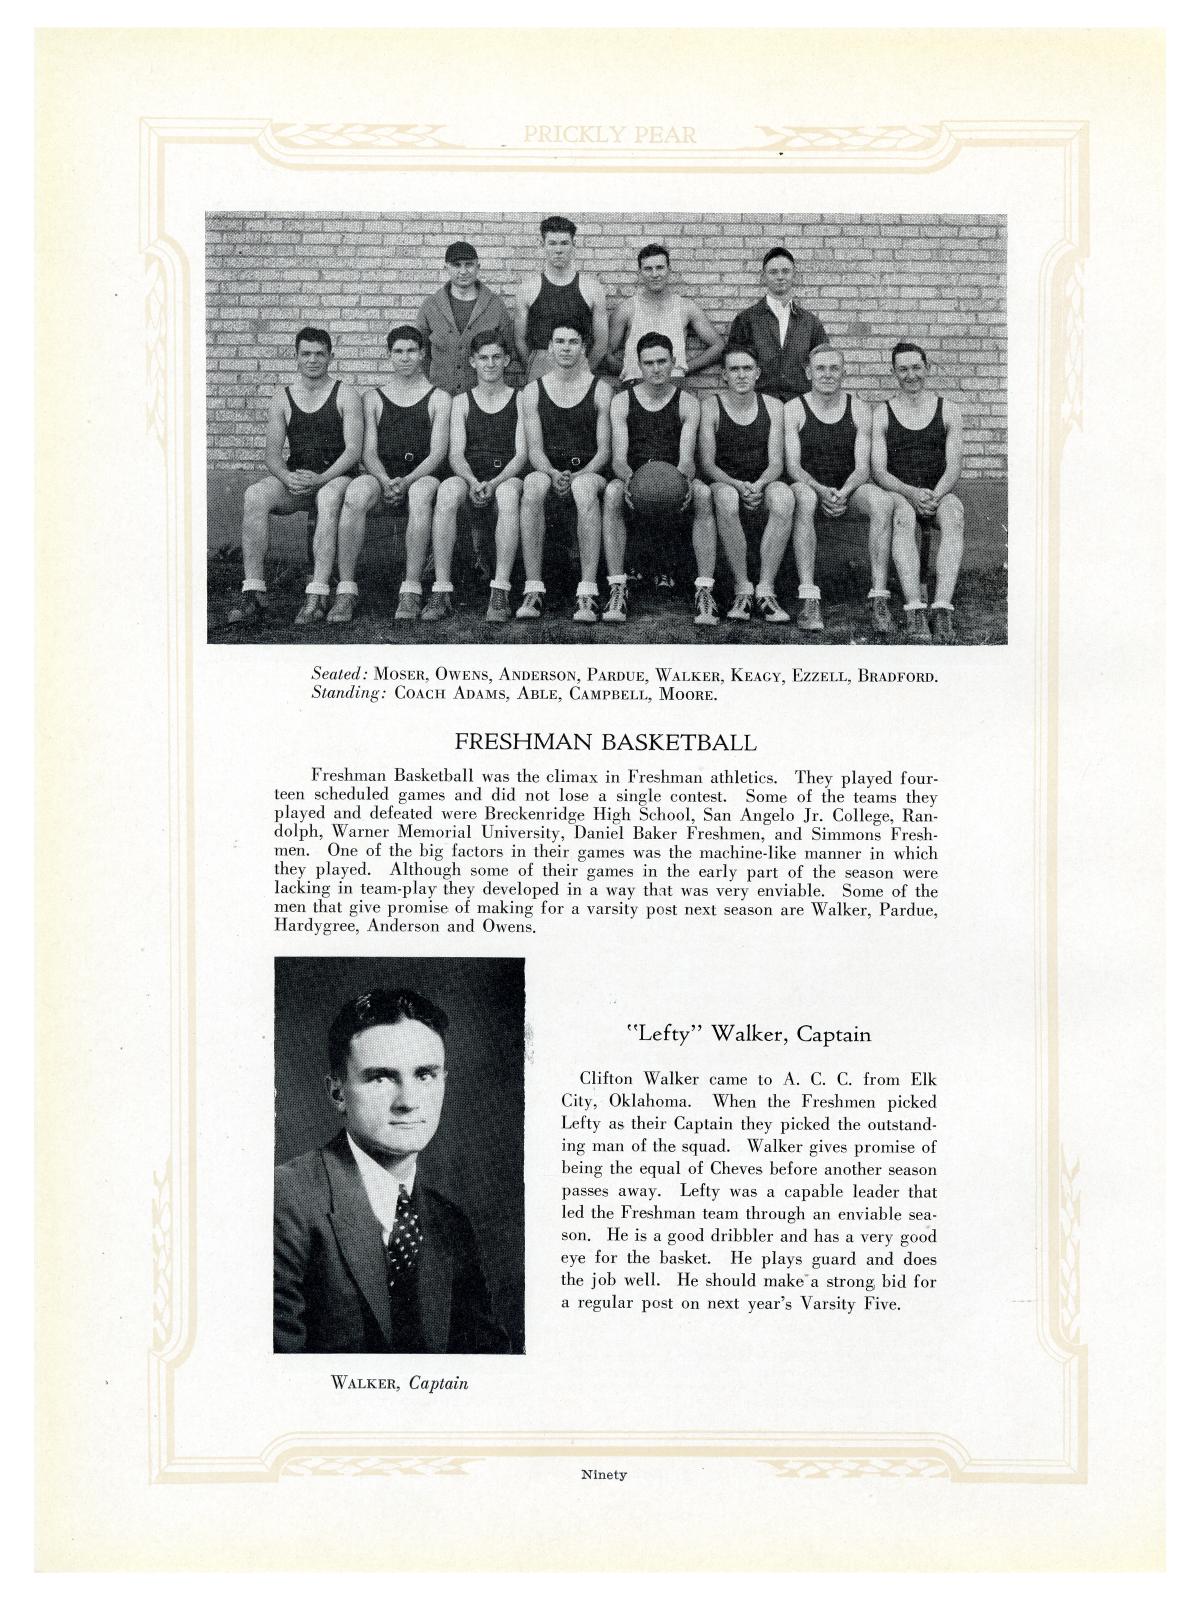 Prickly Pear, Yearbook of Abilene Christian College, 1932
                                                
                                                    90
                                                